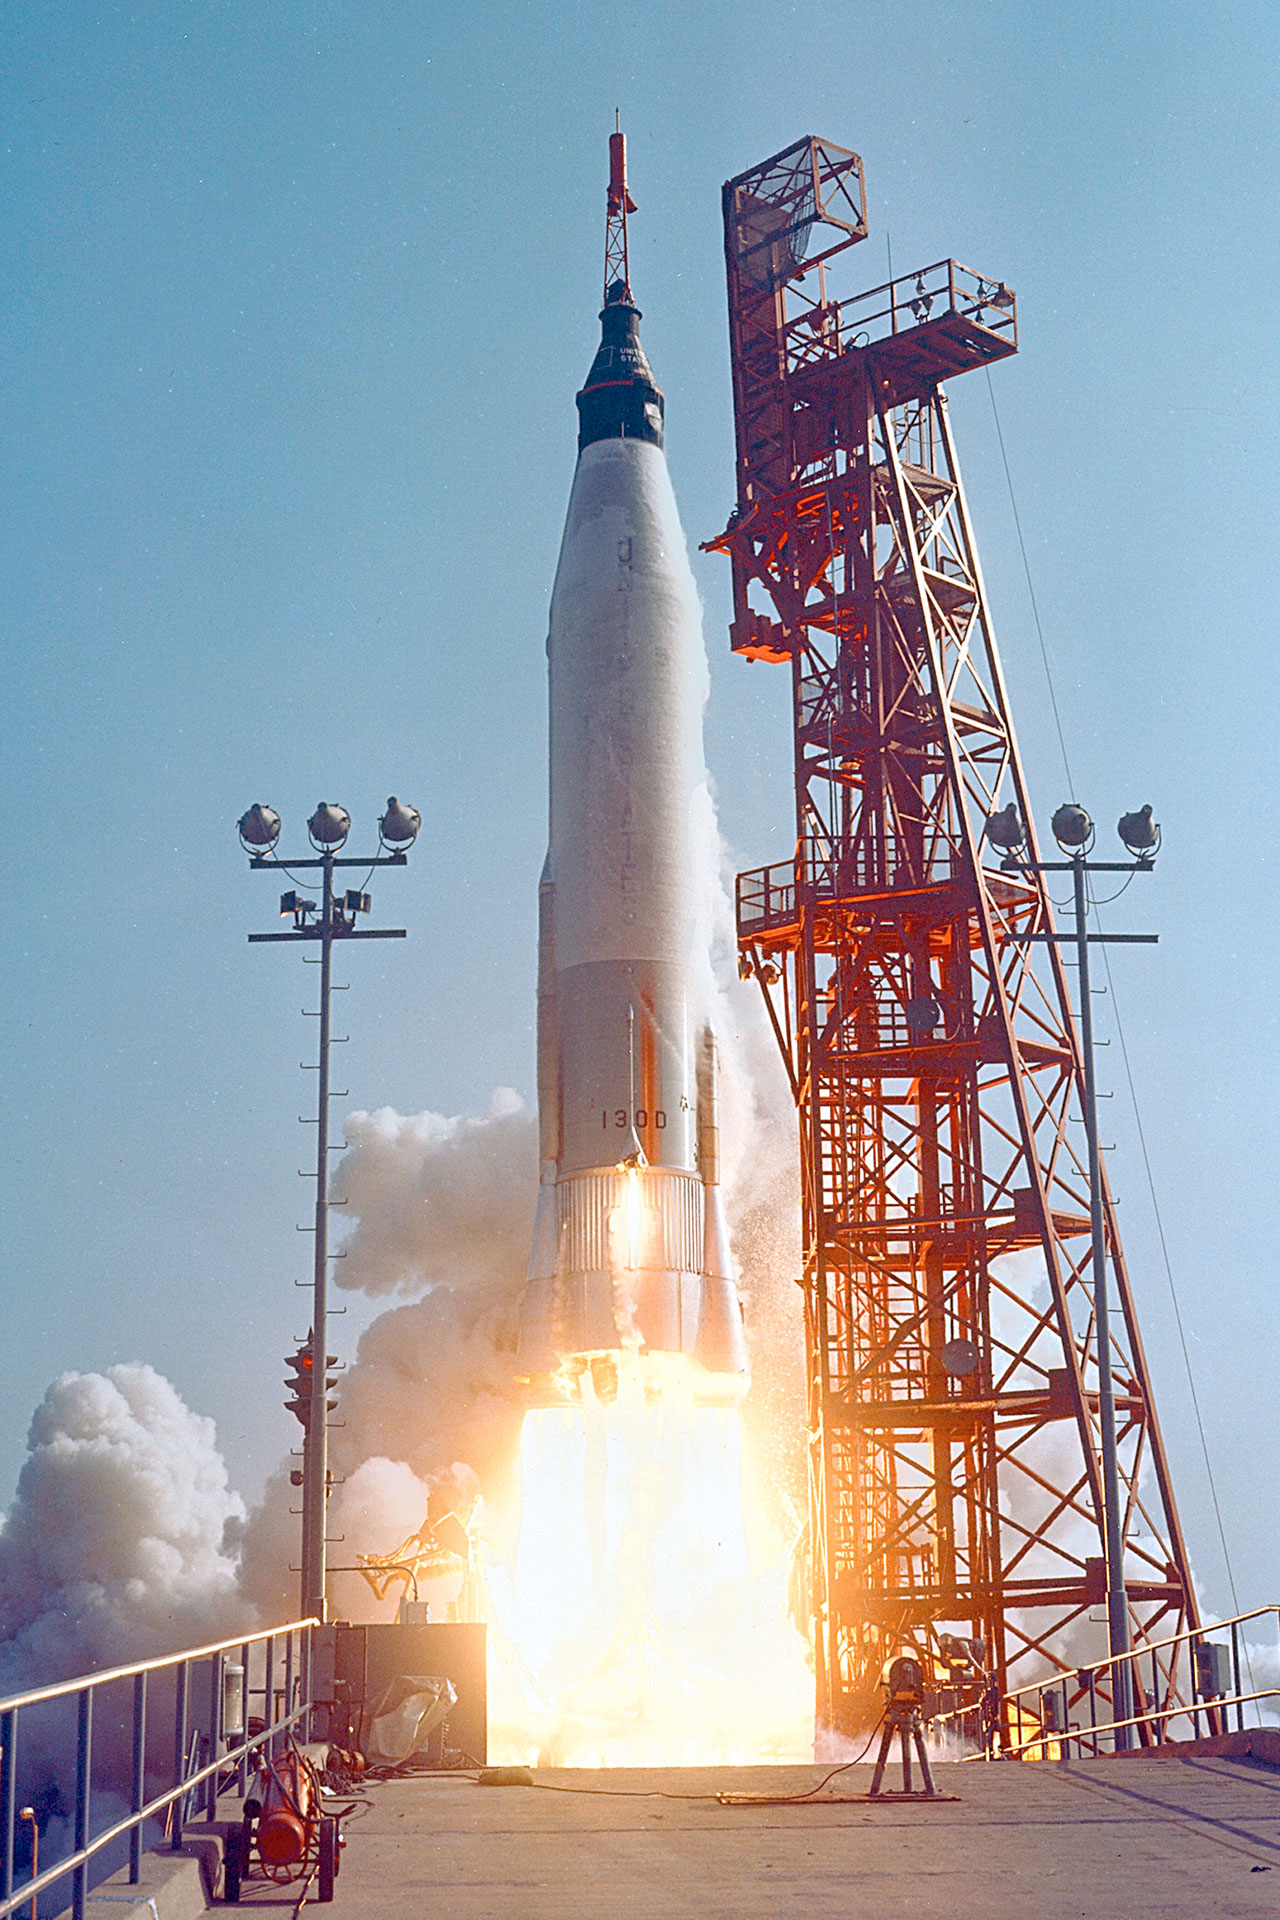 close-up photo of a white rocket launching into a blue sky